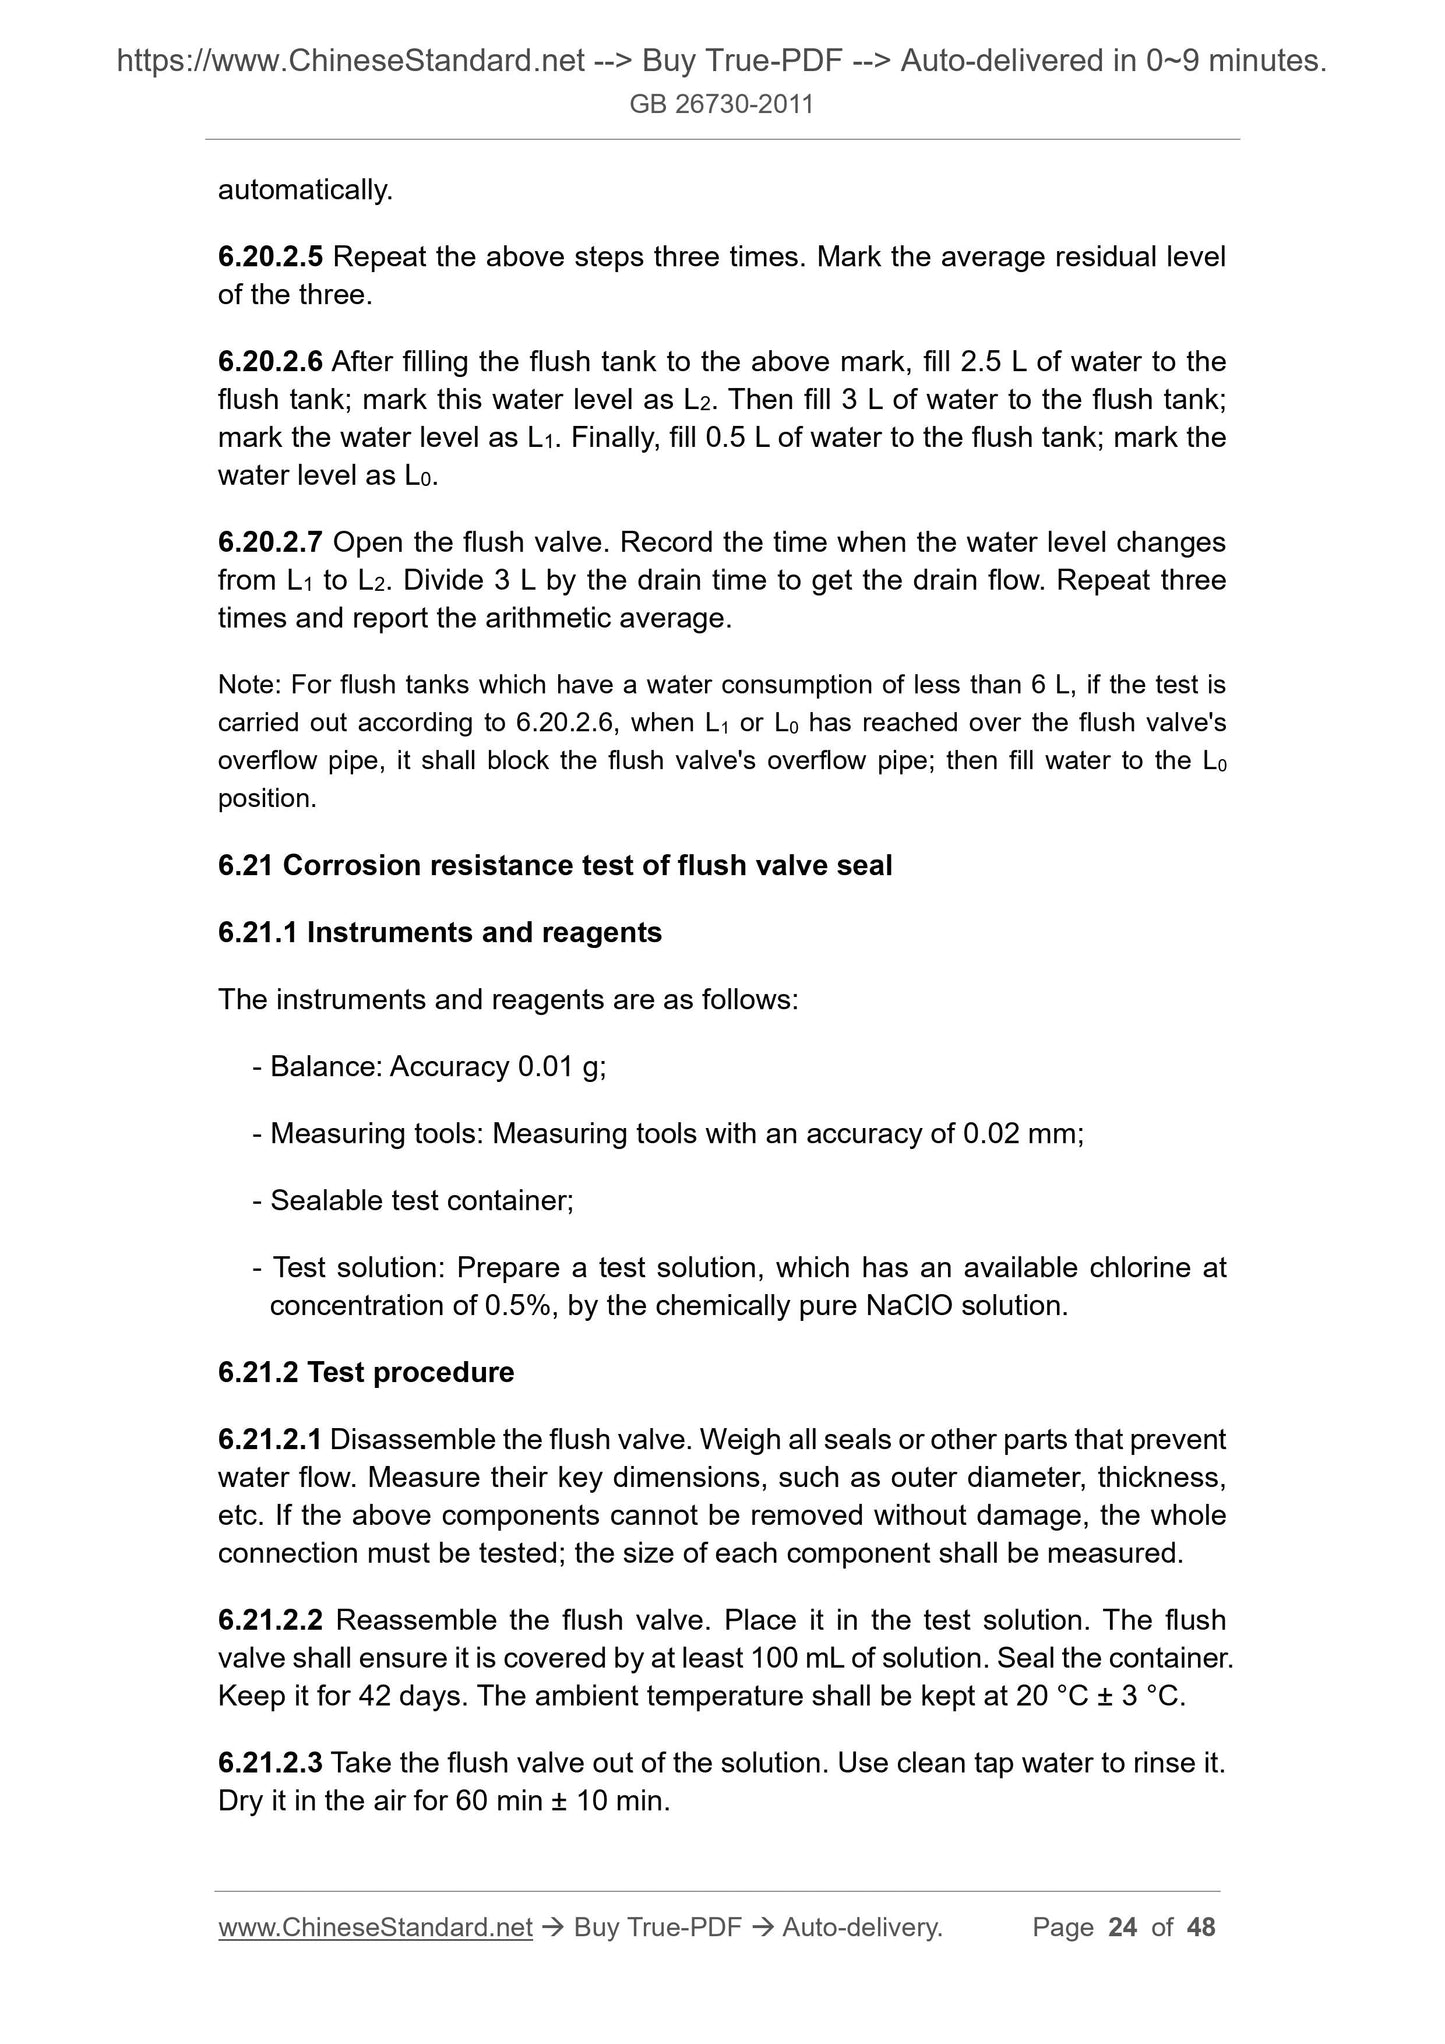 GB 26730-2011 Page 11